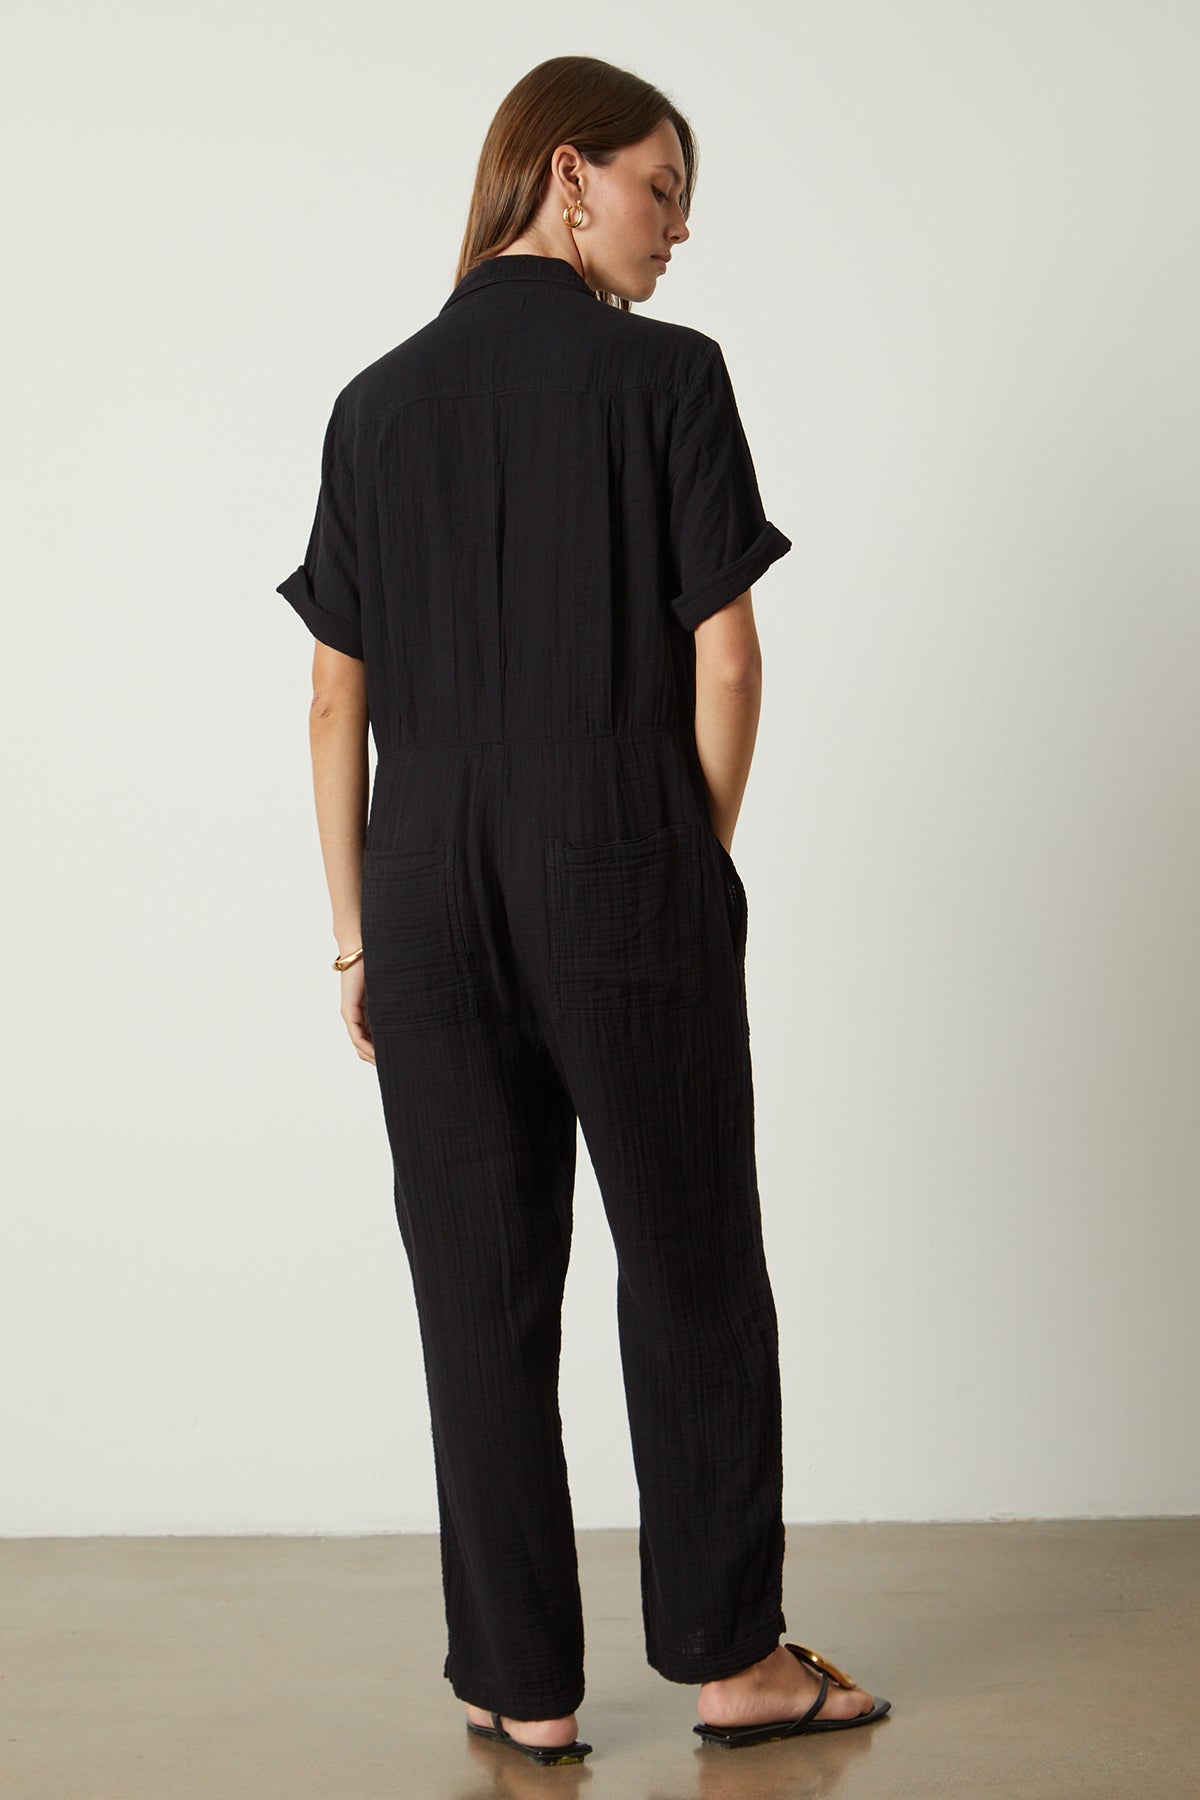   Elia jumpsuit in black with gold hoop earrings, bangle bracelet and sandals full length front back 